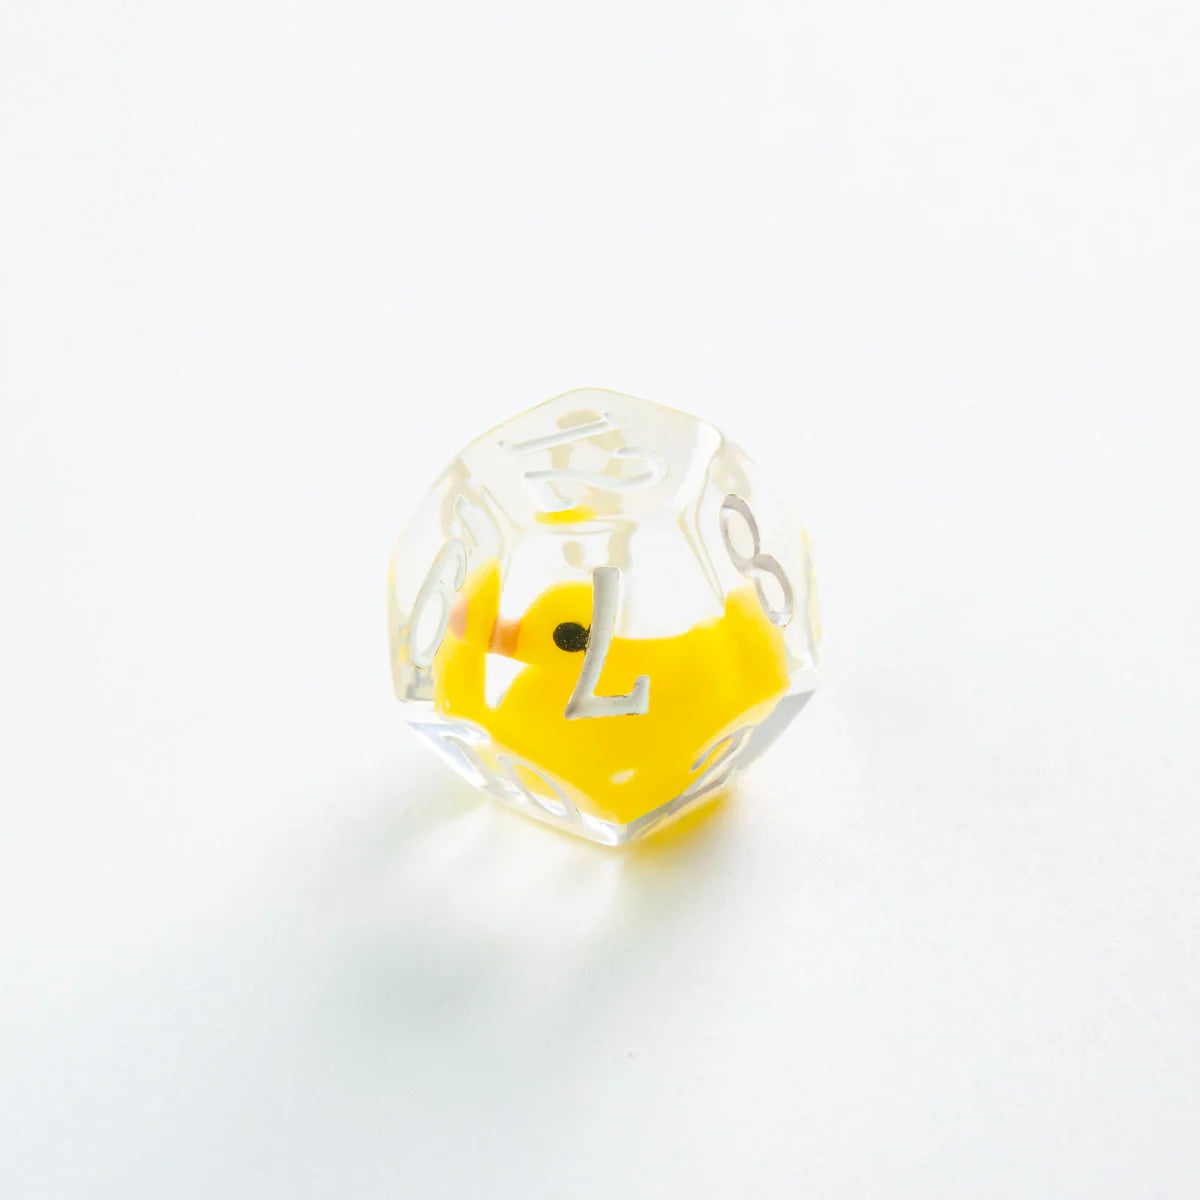 Gamegenic RPG Dice Set - Embraced Series - Rubber Duck